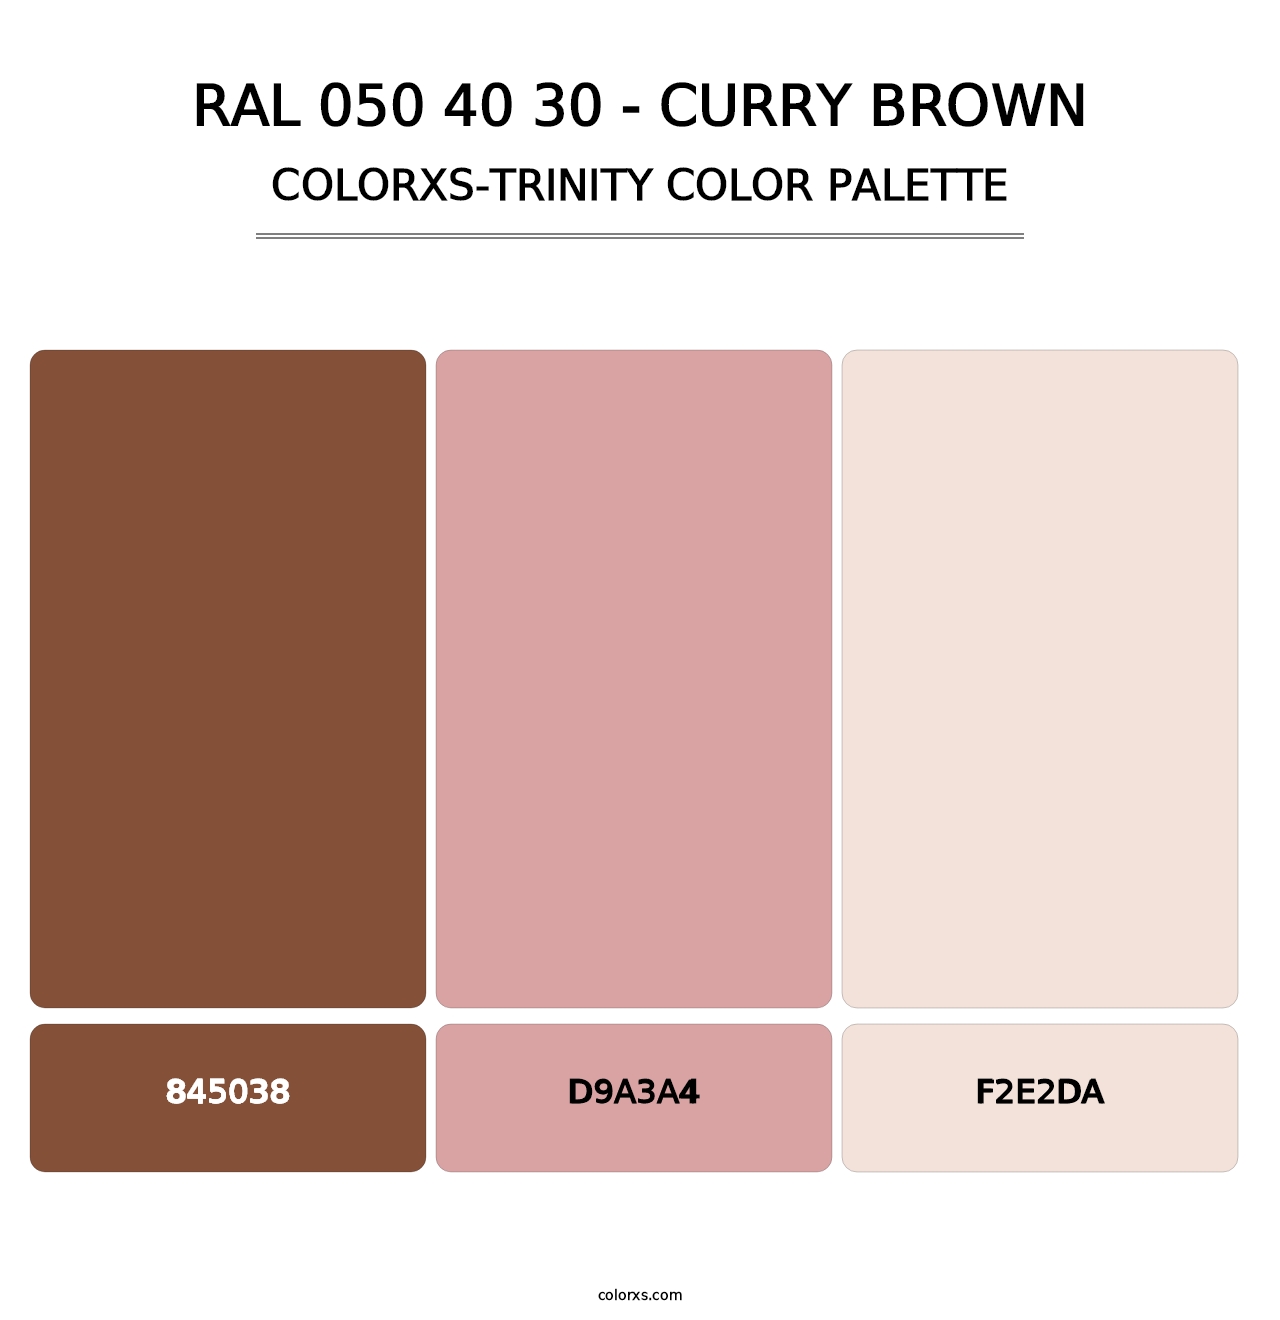 RAL 050 40 30 - Curry Brown - Colorxs Trinity Palette